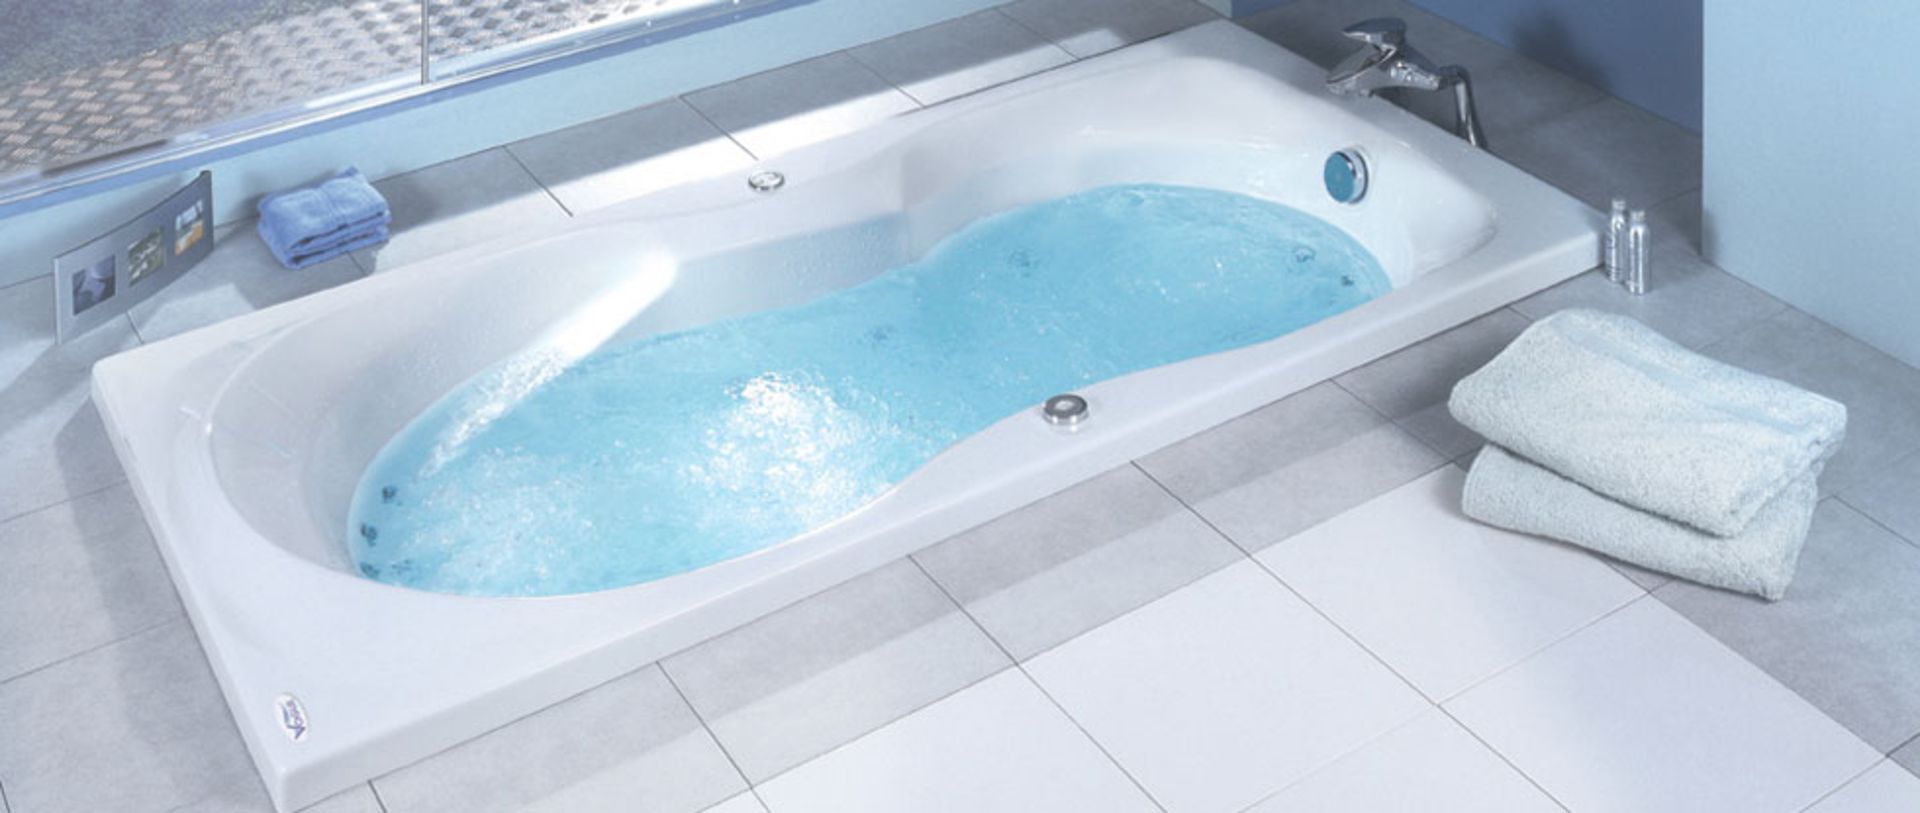 1 x Vogue Bathrooms Sapphire Double Ended Inset Bath Tub - Size: 1800 x 900mm - For The Ultimate - Image 2 of 5